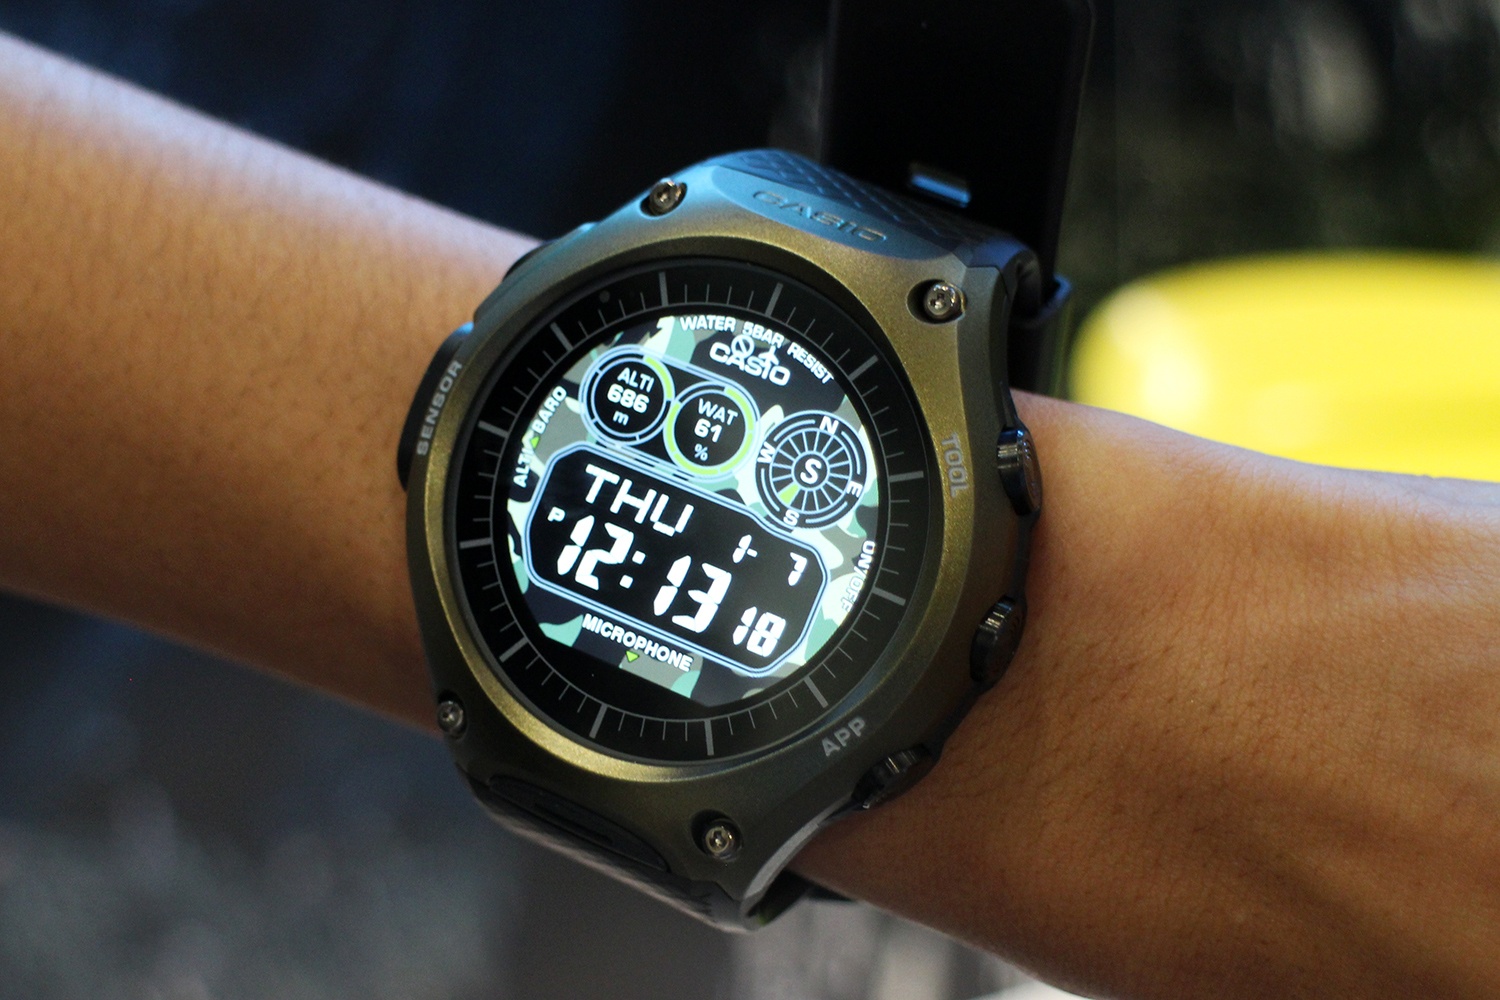 Casio Outdoor Smartwatch Wsd F10 Revealed At Ces 2016 Smart Watch Android Apple Watch Fashion Outdoor Watch